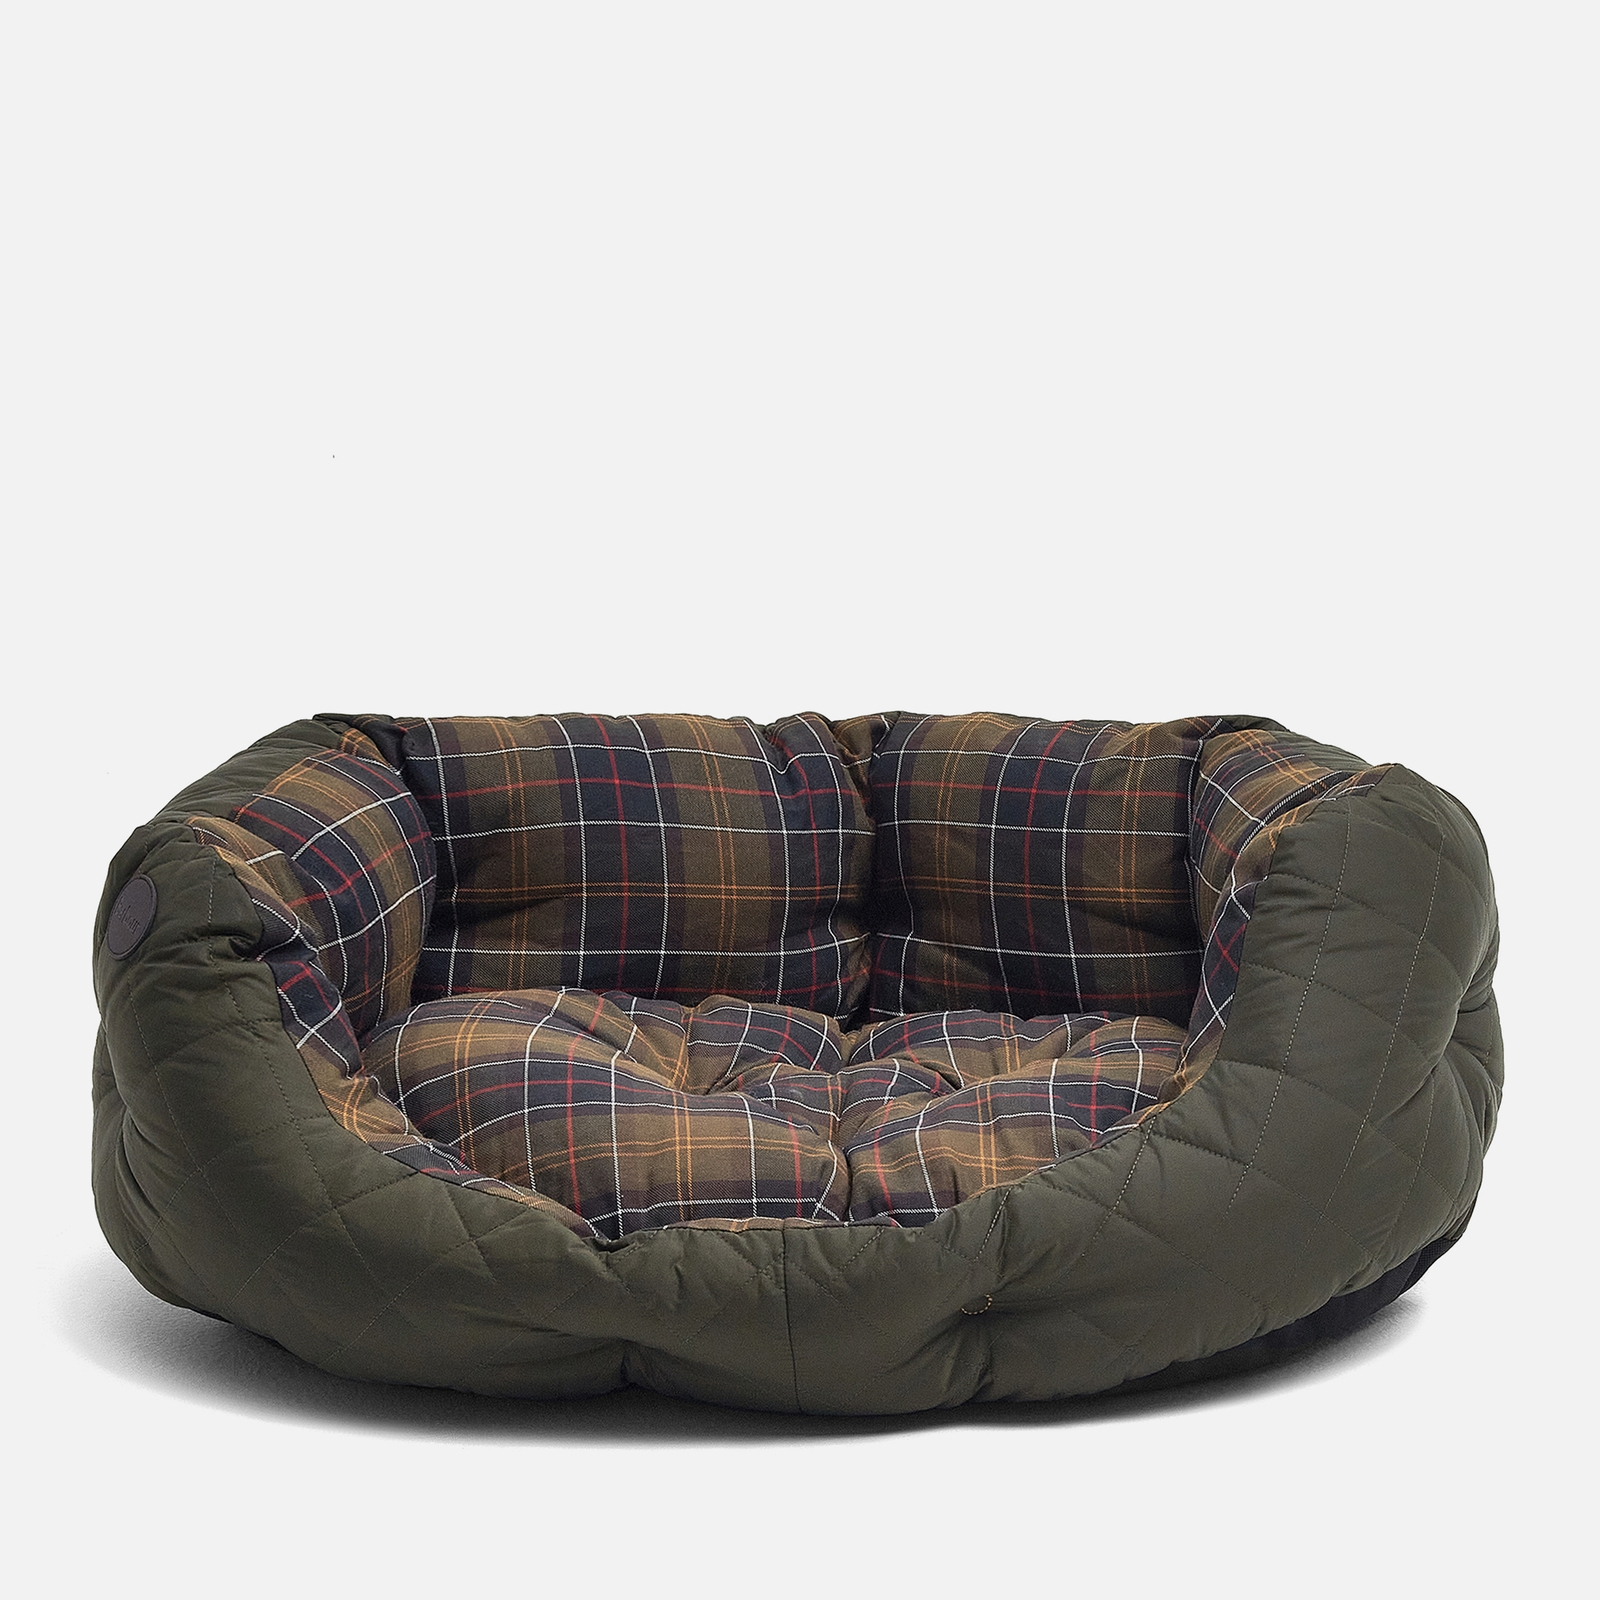 Barbour Quilted Dog Bed - 30 inch - Olive